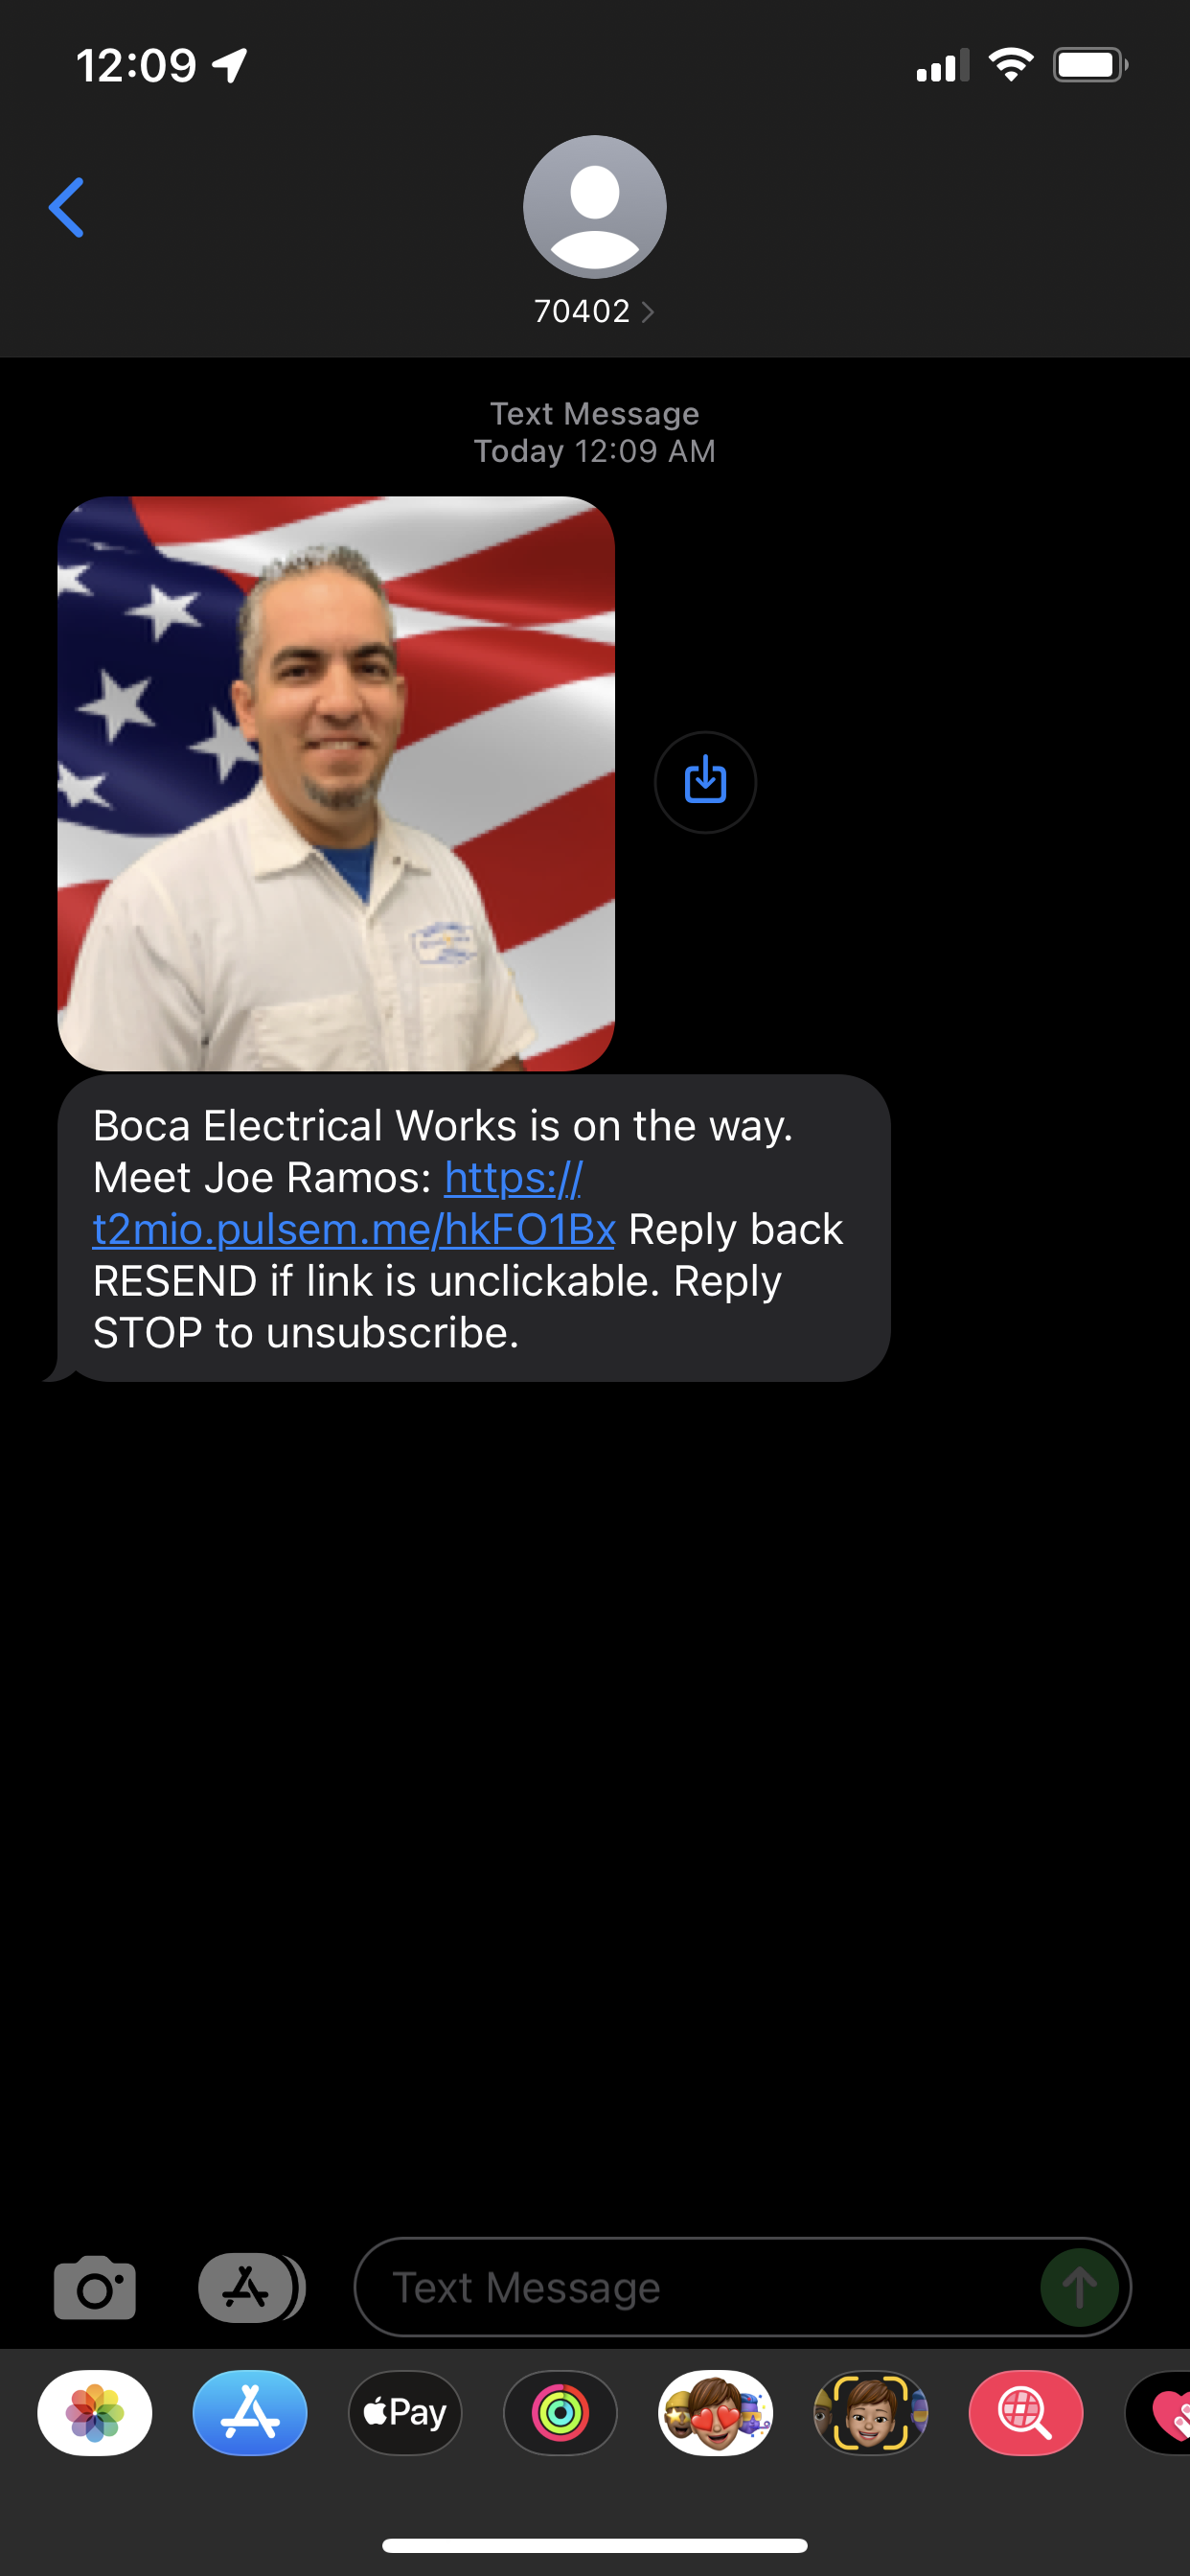 Prior to service, the customer will automatically receive a text message which includes a short profile of your technician, and when to expect their arrival.